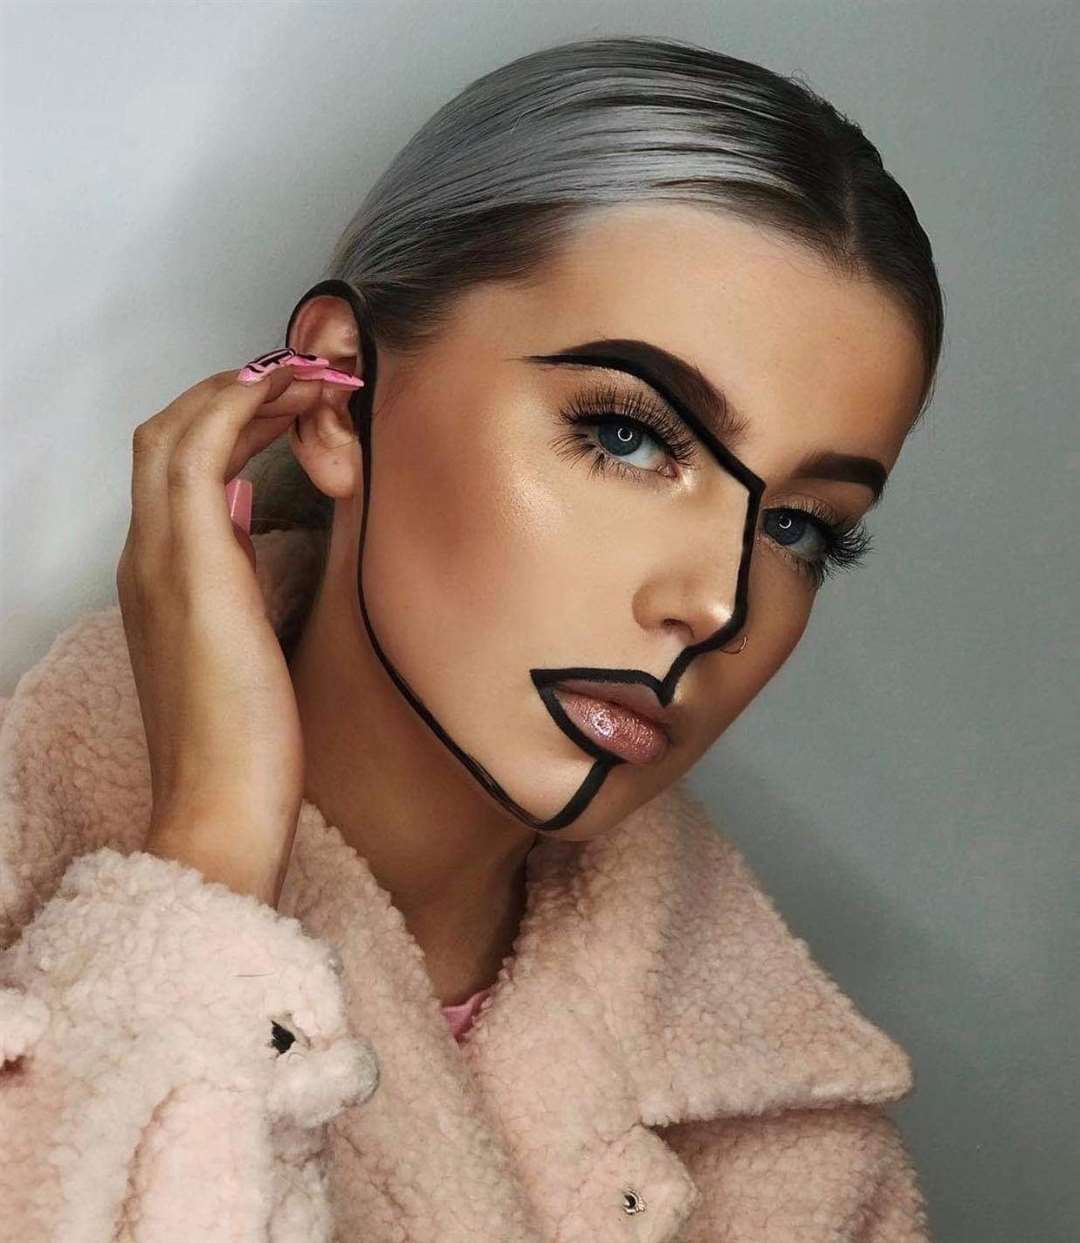 She has created an array of different looks using make-up.